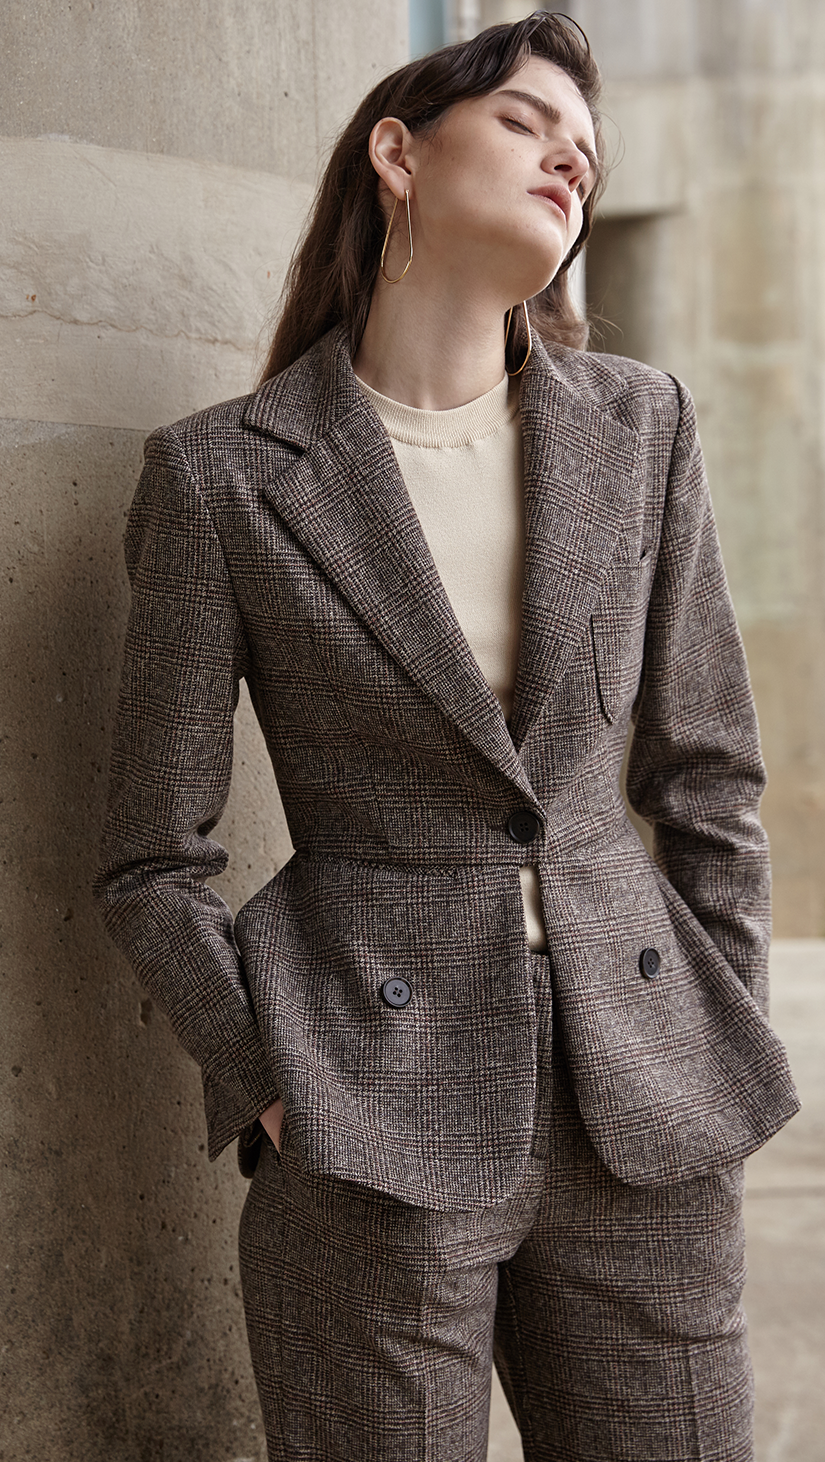 The Anouk Jacket in brown, cream and black houndstooth pattern. With single-button closure, slim notched lapels, button cuffs, chest welt pocket, lightly padded structured shoulder, back vent accentuate the slim silhouette. Tailored for a slim fit. Mid-weight, non-stretchy fabric.